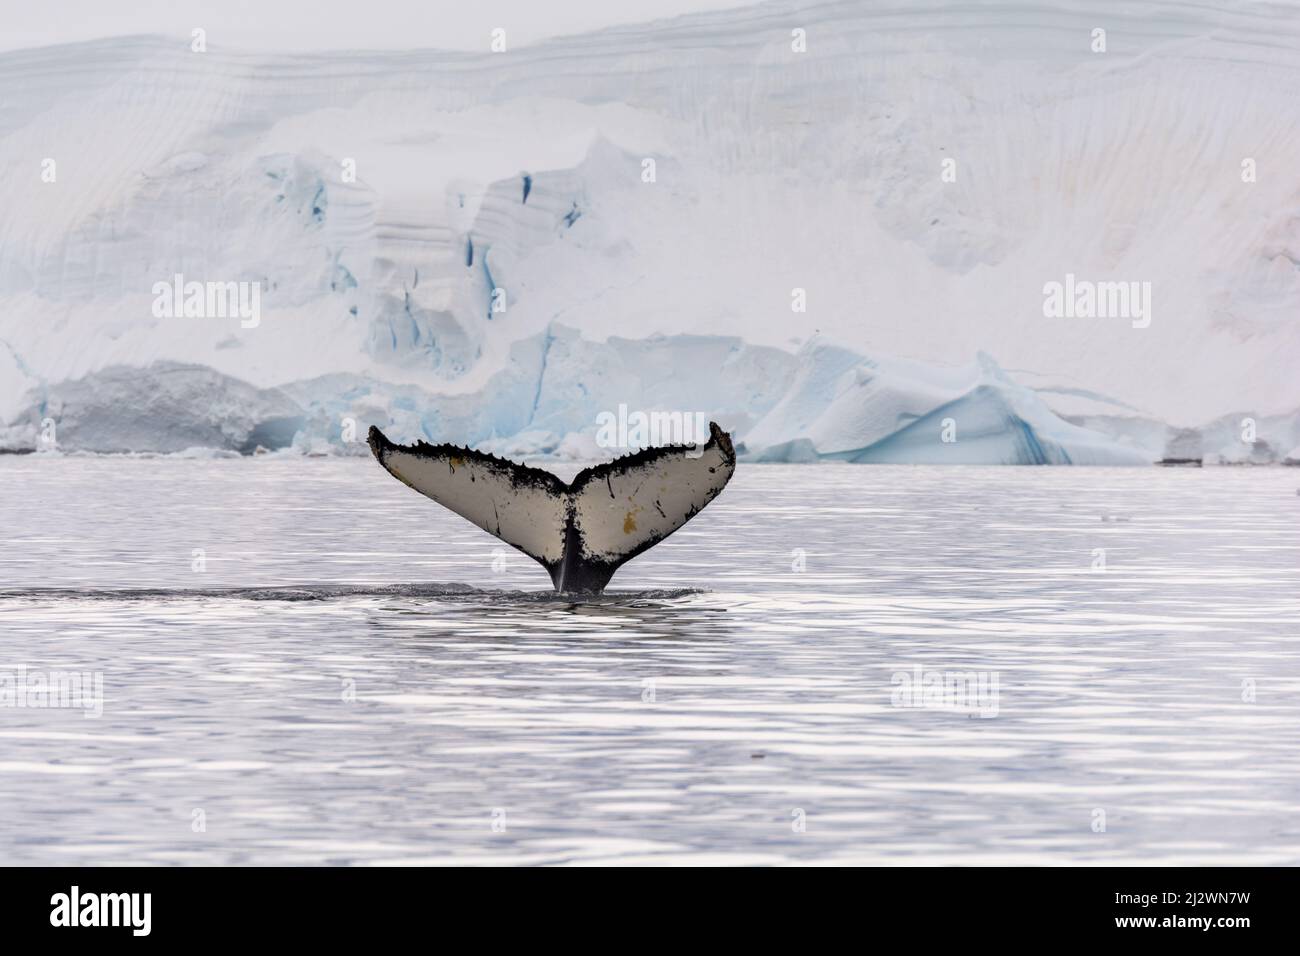 The tail fluke of a Humpback whale (Megaptera novaeangliae) visible above water as the whale dives, taken in Wilhelmina Bay, Antarctic Peninsula Stock Photo